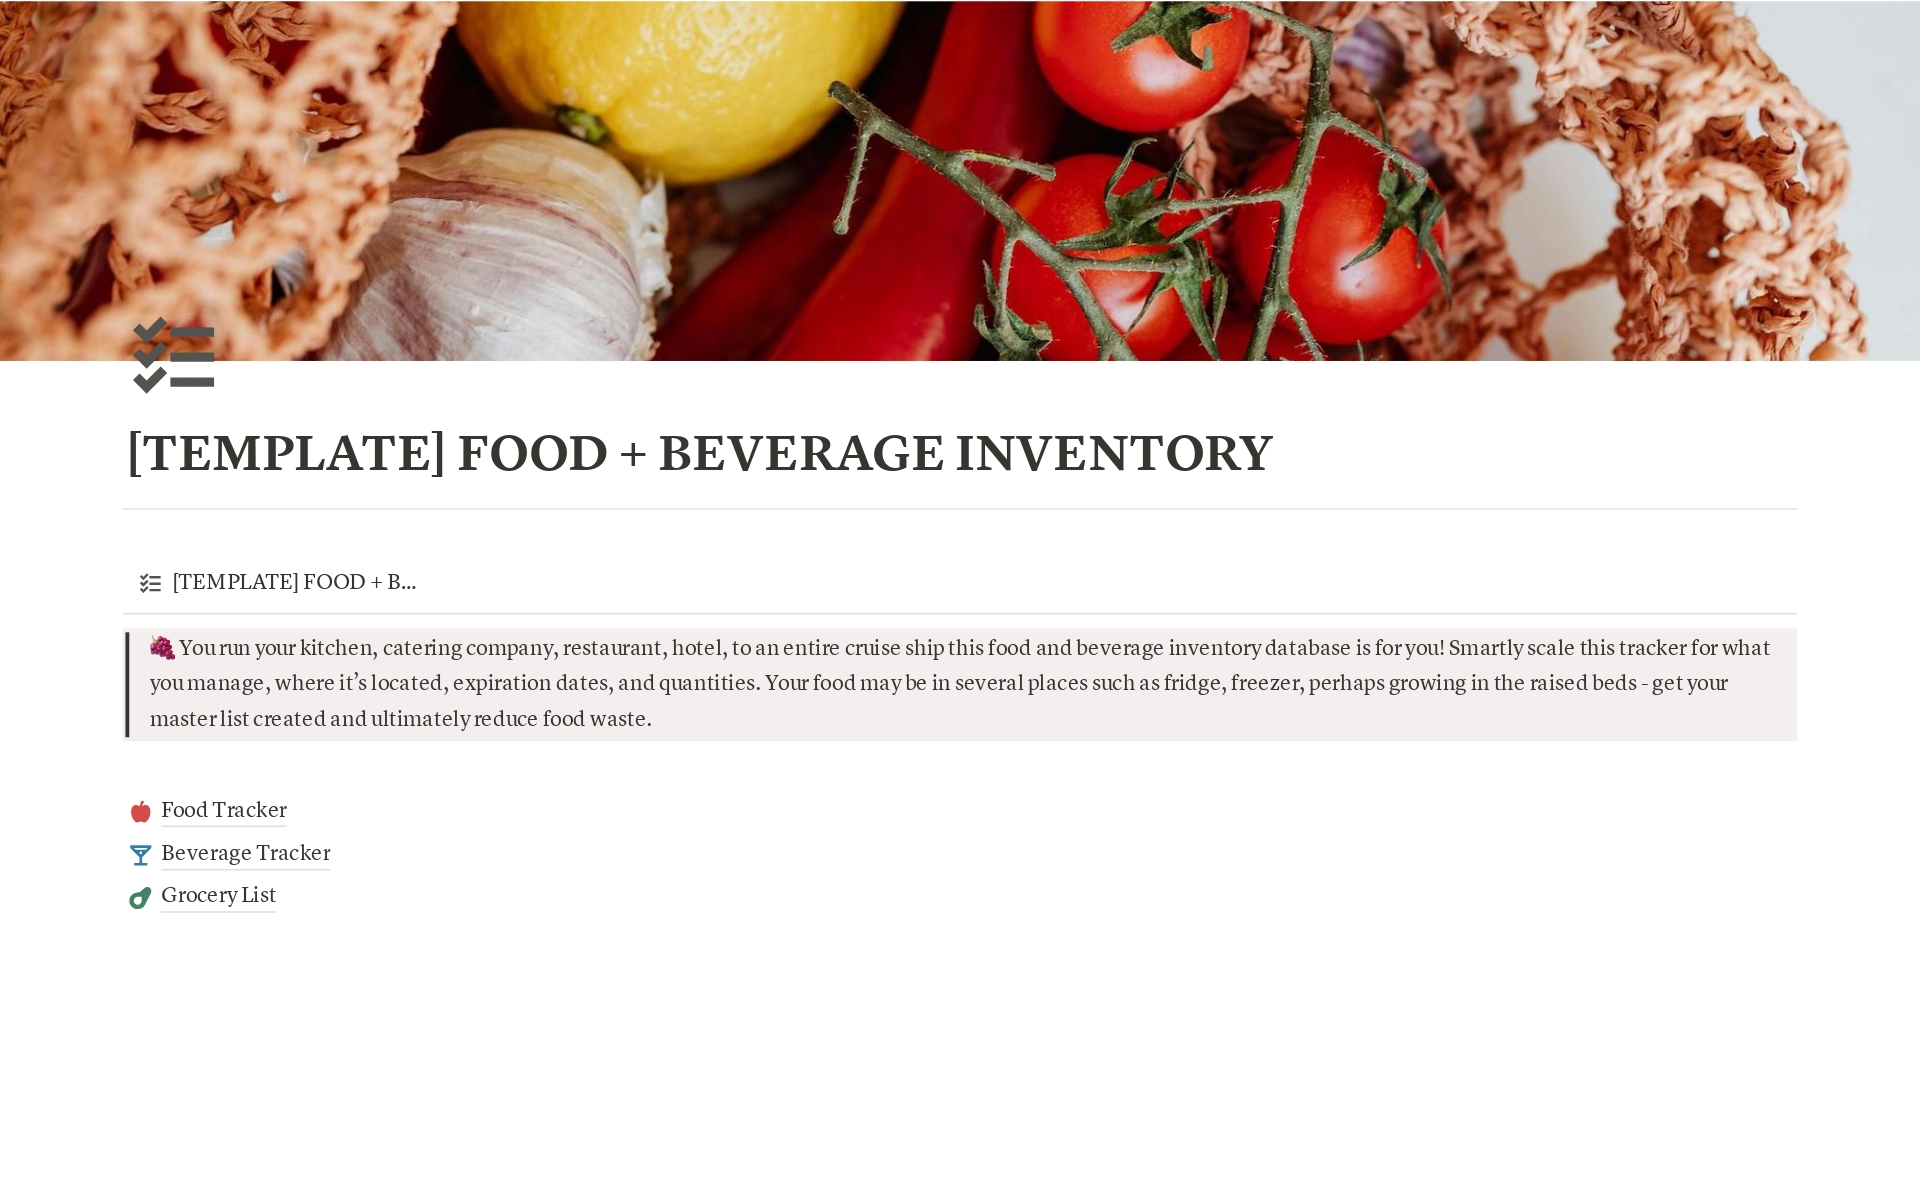 Everything you need to manage your food and beverage inventory. Smartly scale this tracker for what you manage, its location, expiration dates, and quantities. Your food may be in several places such as a fridge, or freezer, perhaps growing in the raised beds. Reduce food waste. 